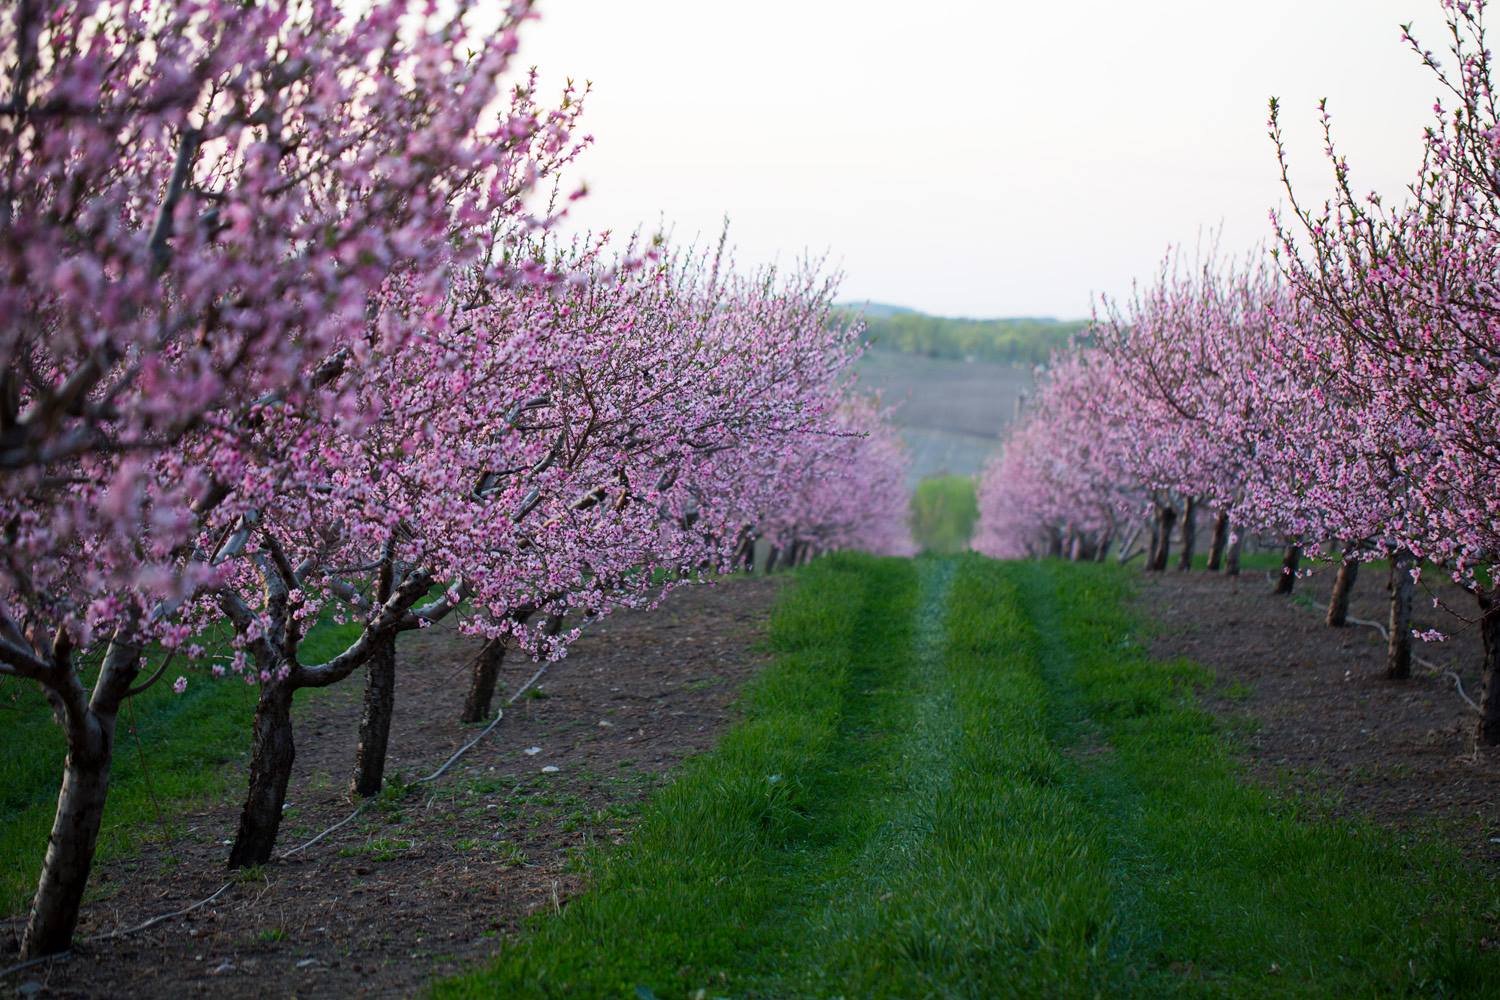 https://af62359ed6764b37dd8d-a09ab6654f67c1c7801ec2e0698b9db1.ssl.cf2.rackcdn.com/images/King_Orchards_-_cherry_blossoms.jpg